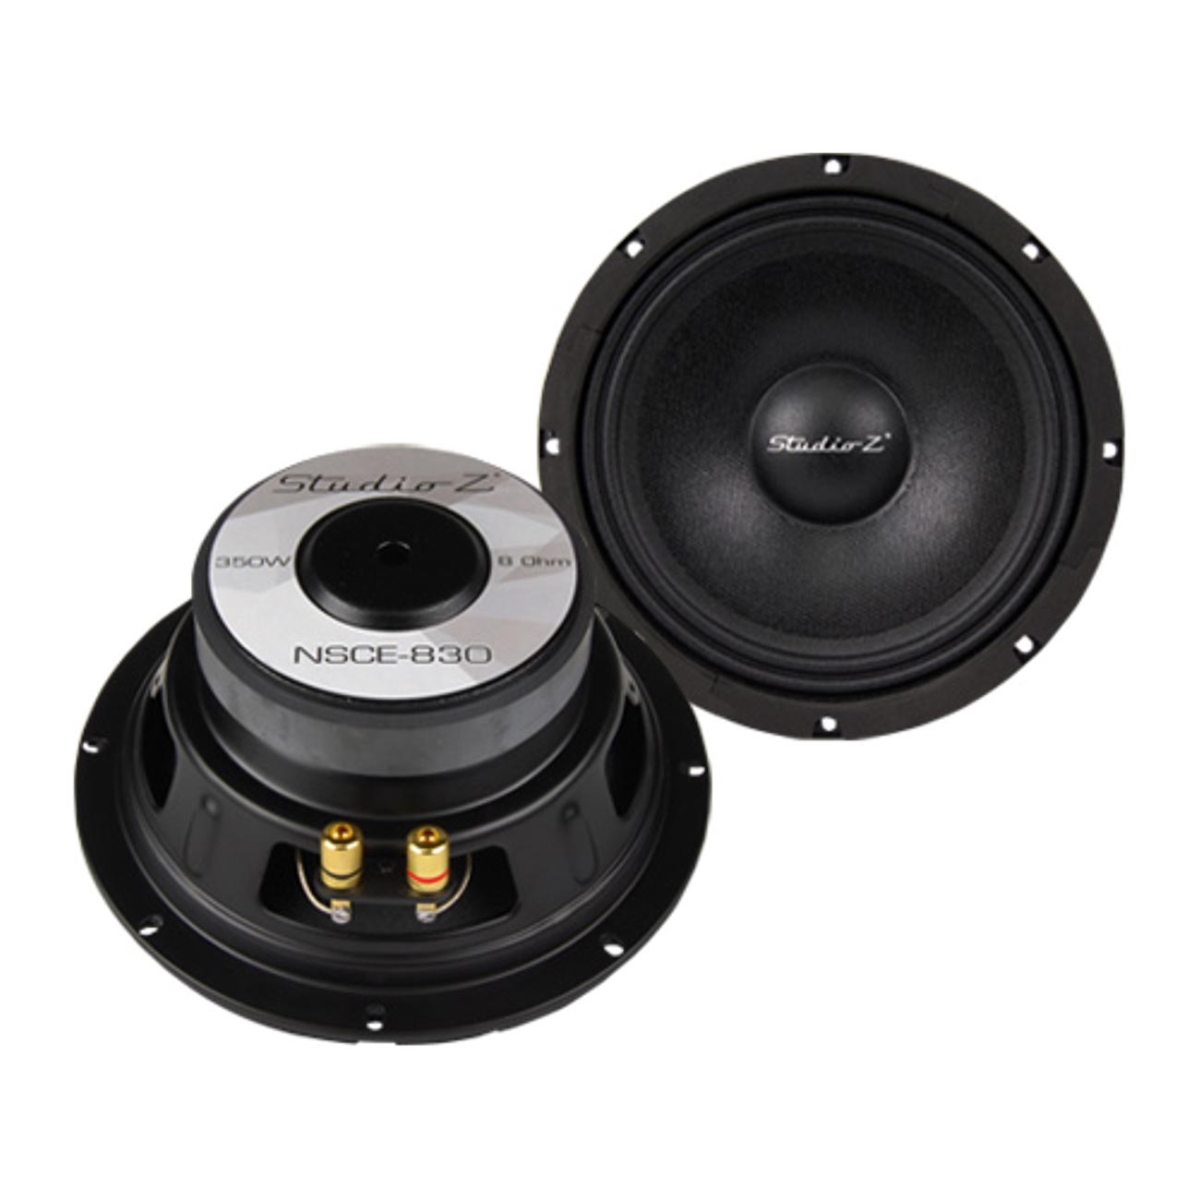 Picture of Nippon NSCE830 8 in. Studio Z 350W Max 8 Ohm Woofer with 1 in. Aluminum Voice Coil